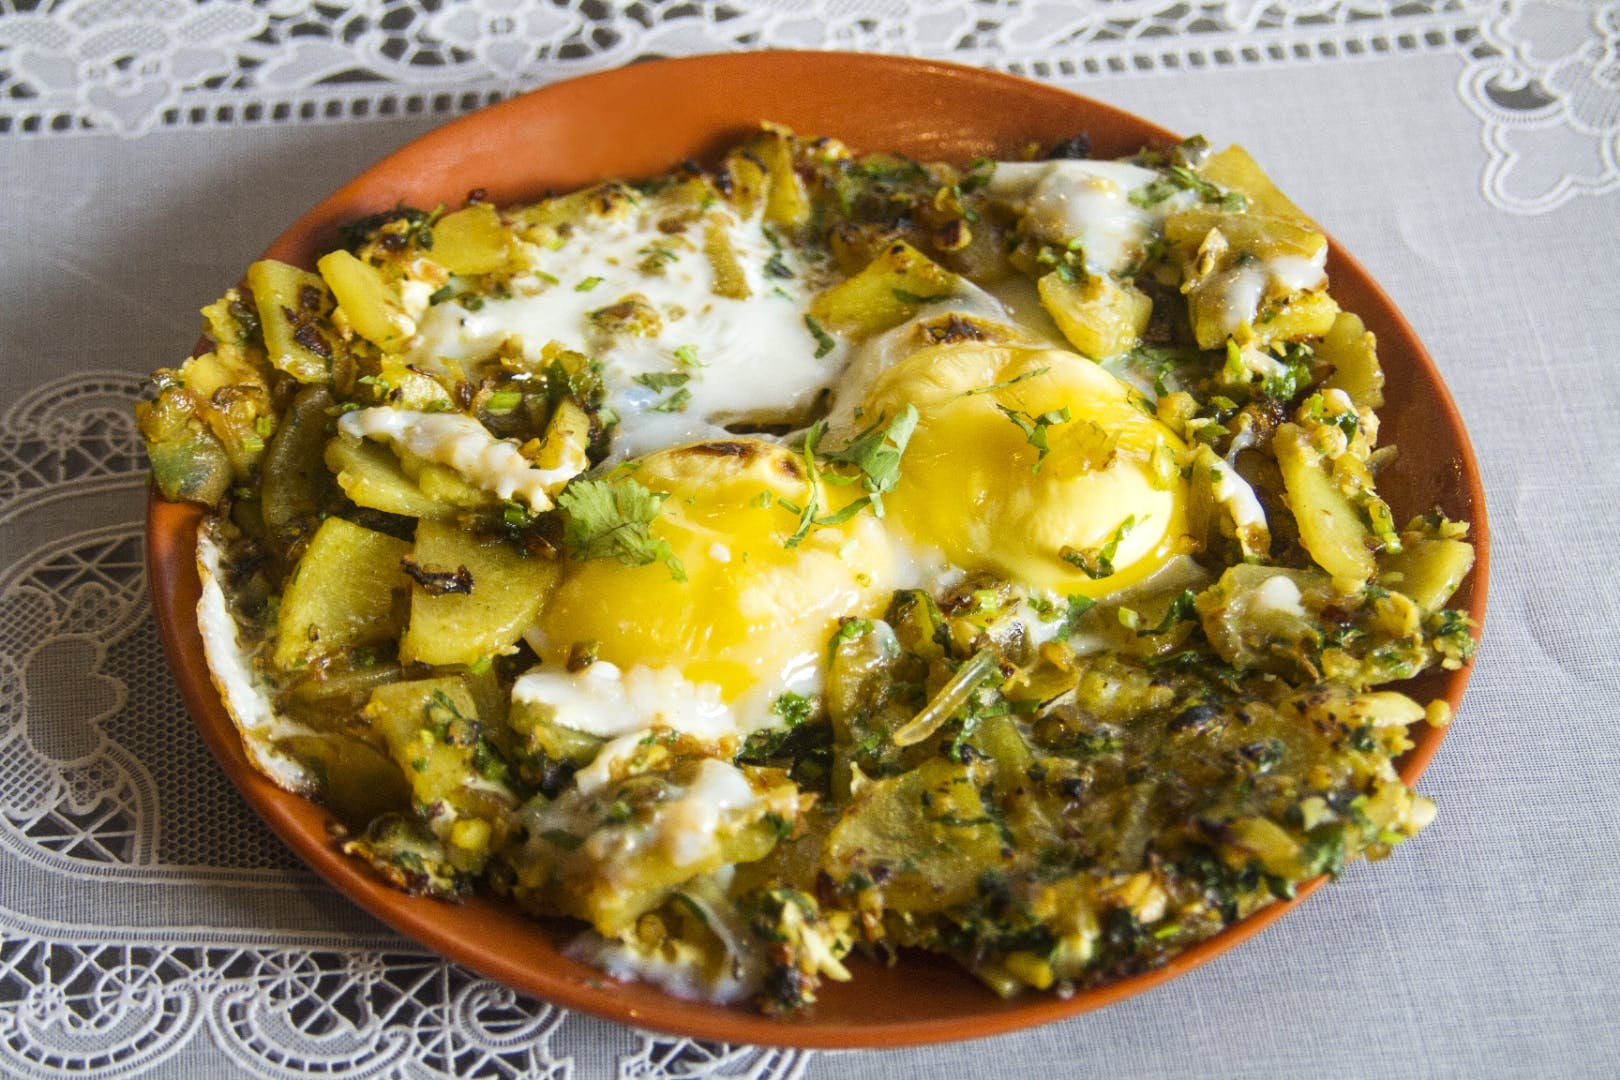 Dish,Cuisine,Food,Ingredient,Produce,Poached egg,Recipe,Bubble and squeak,Breakfast,Fried egg